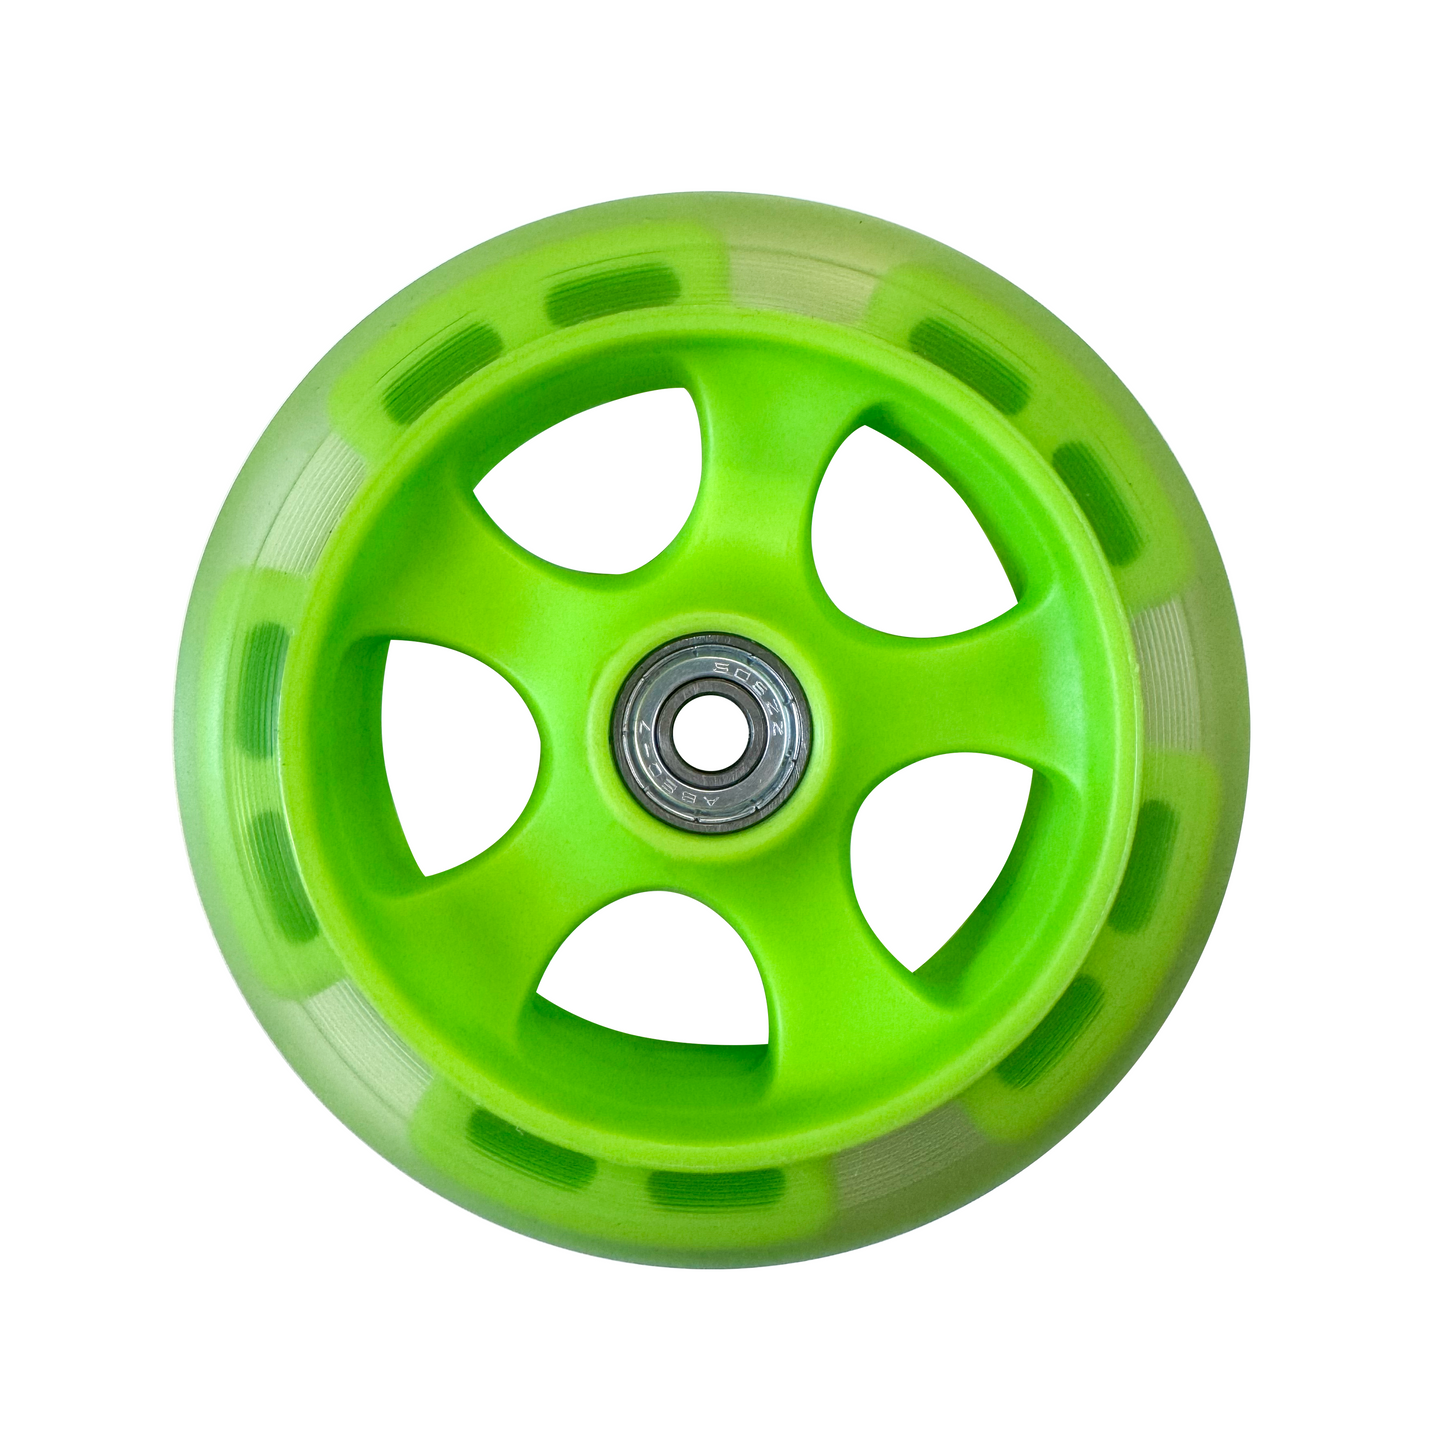 Replacement-Wheel-Front-Small-Green-Trunki-Scooter-image1